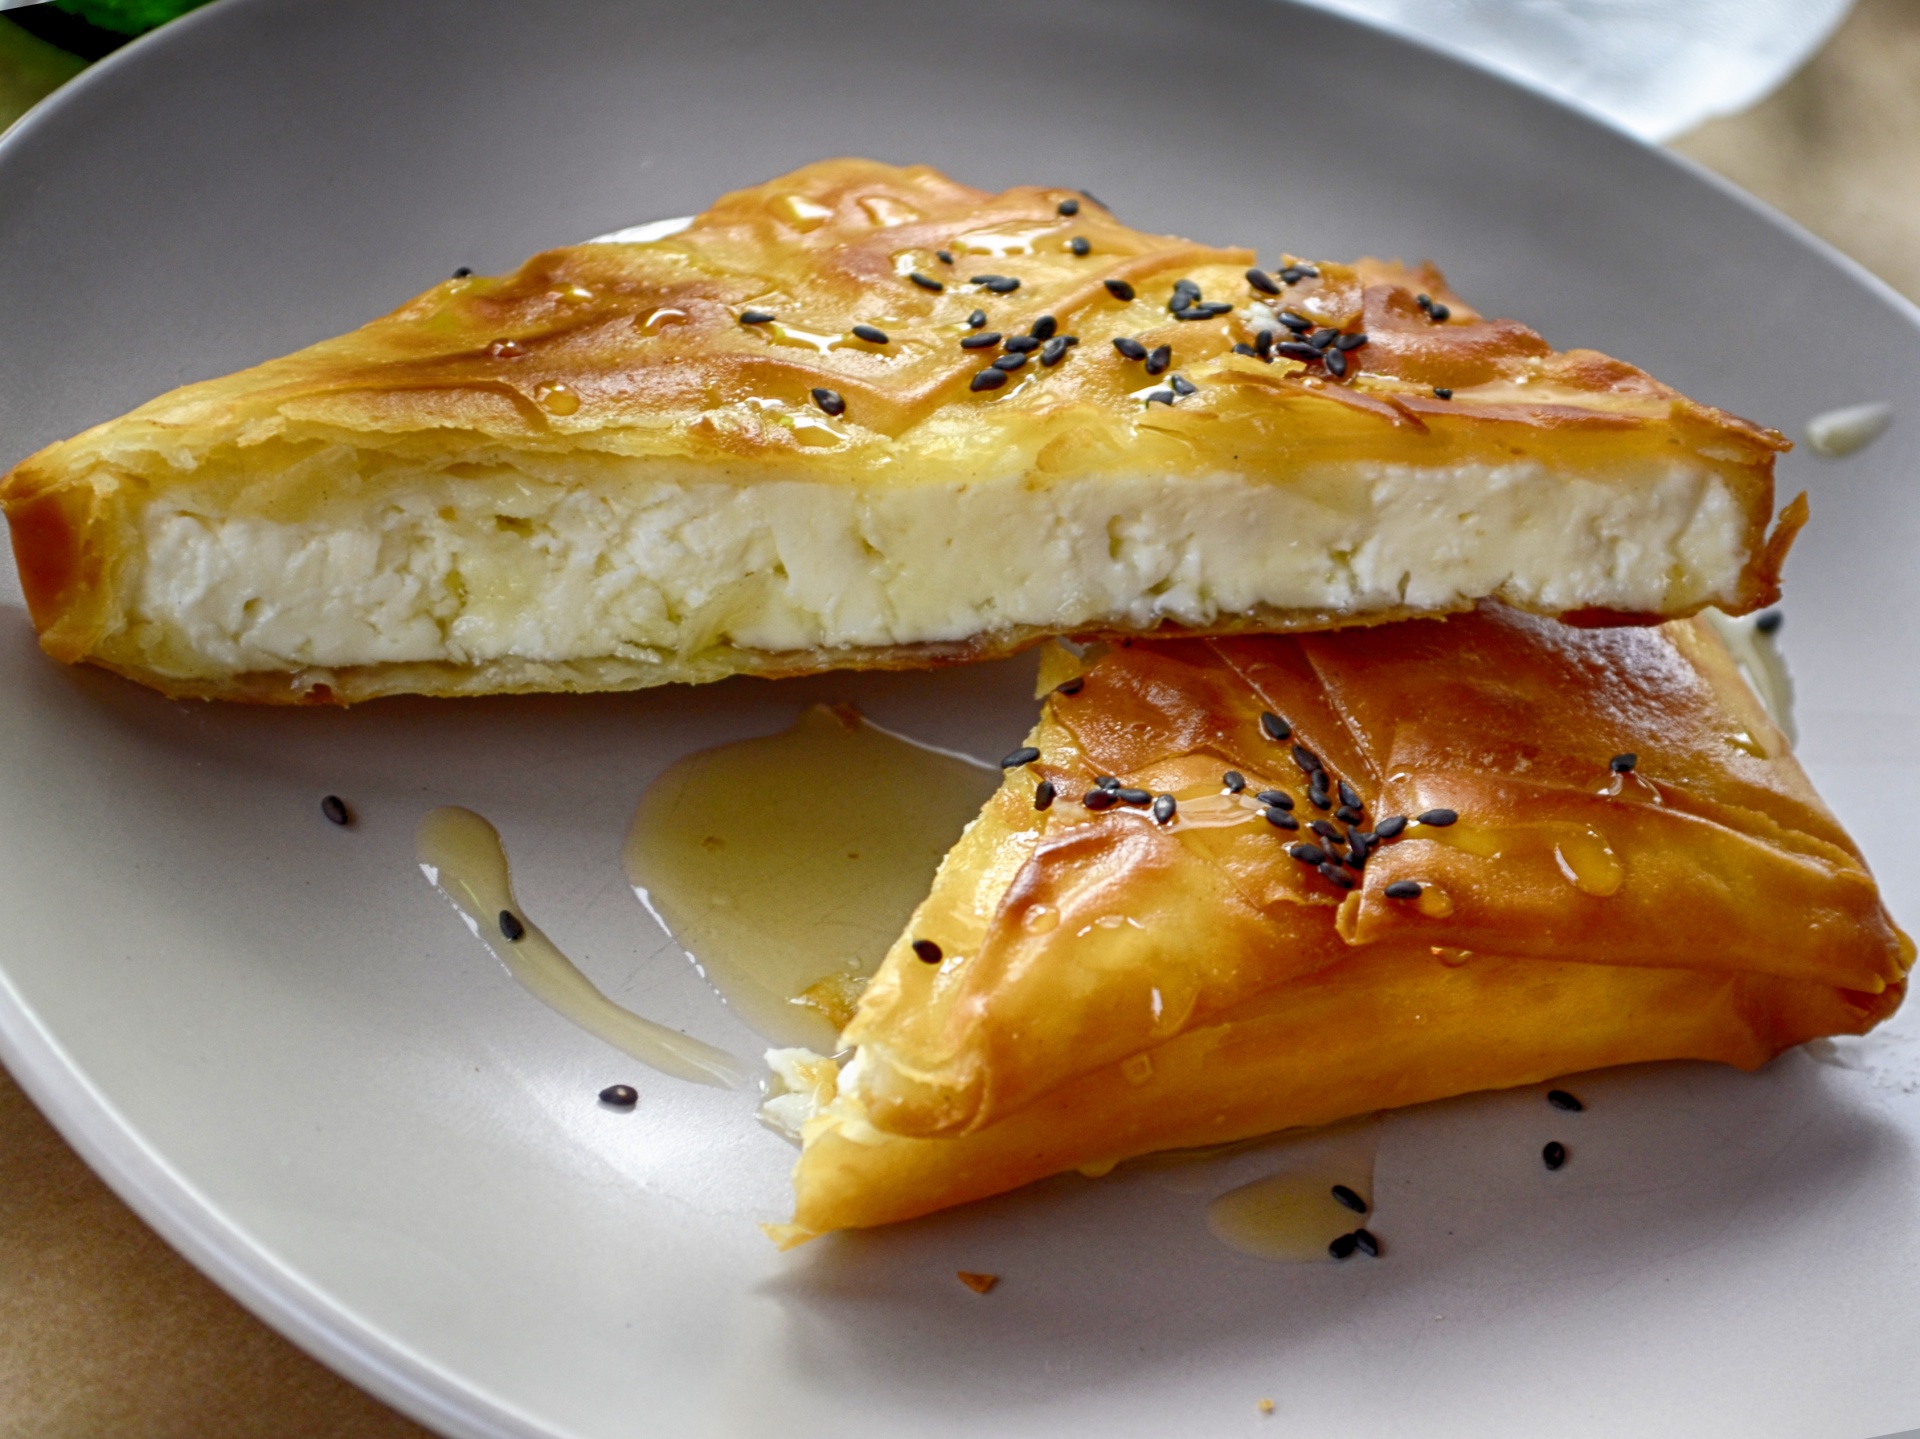 Dates Wrapped in Cheese Pastry